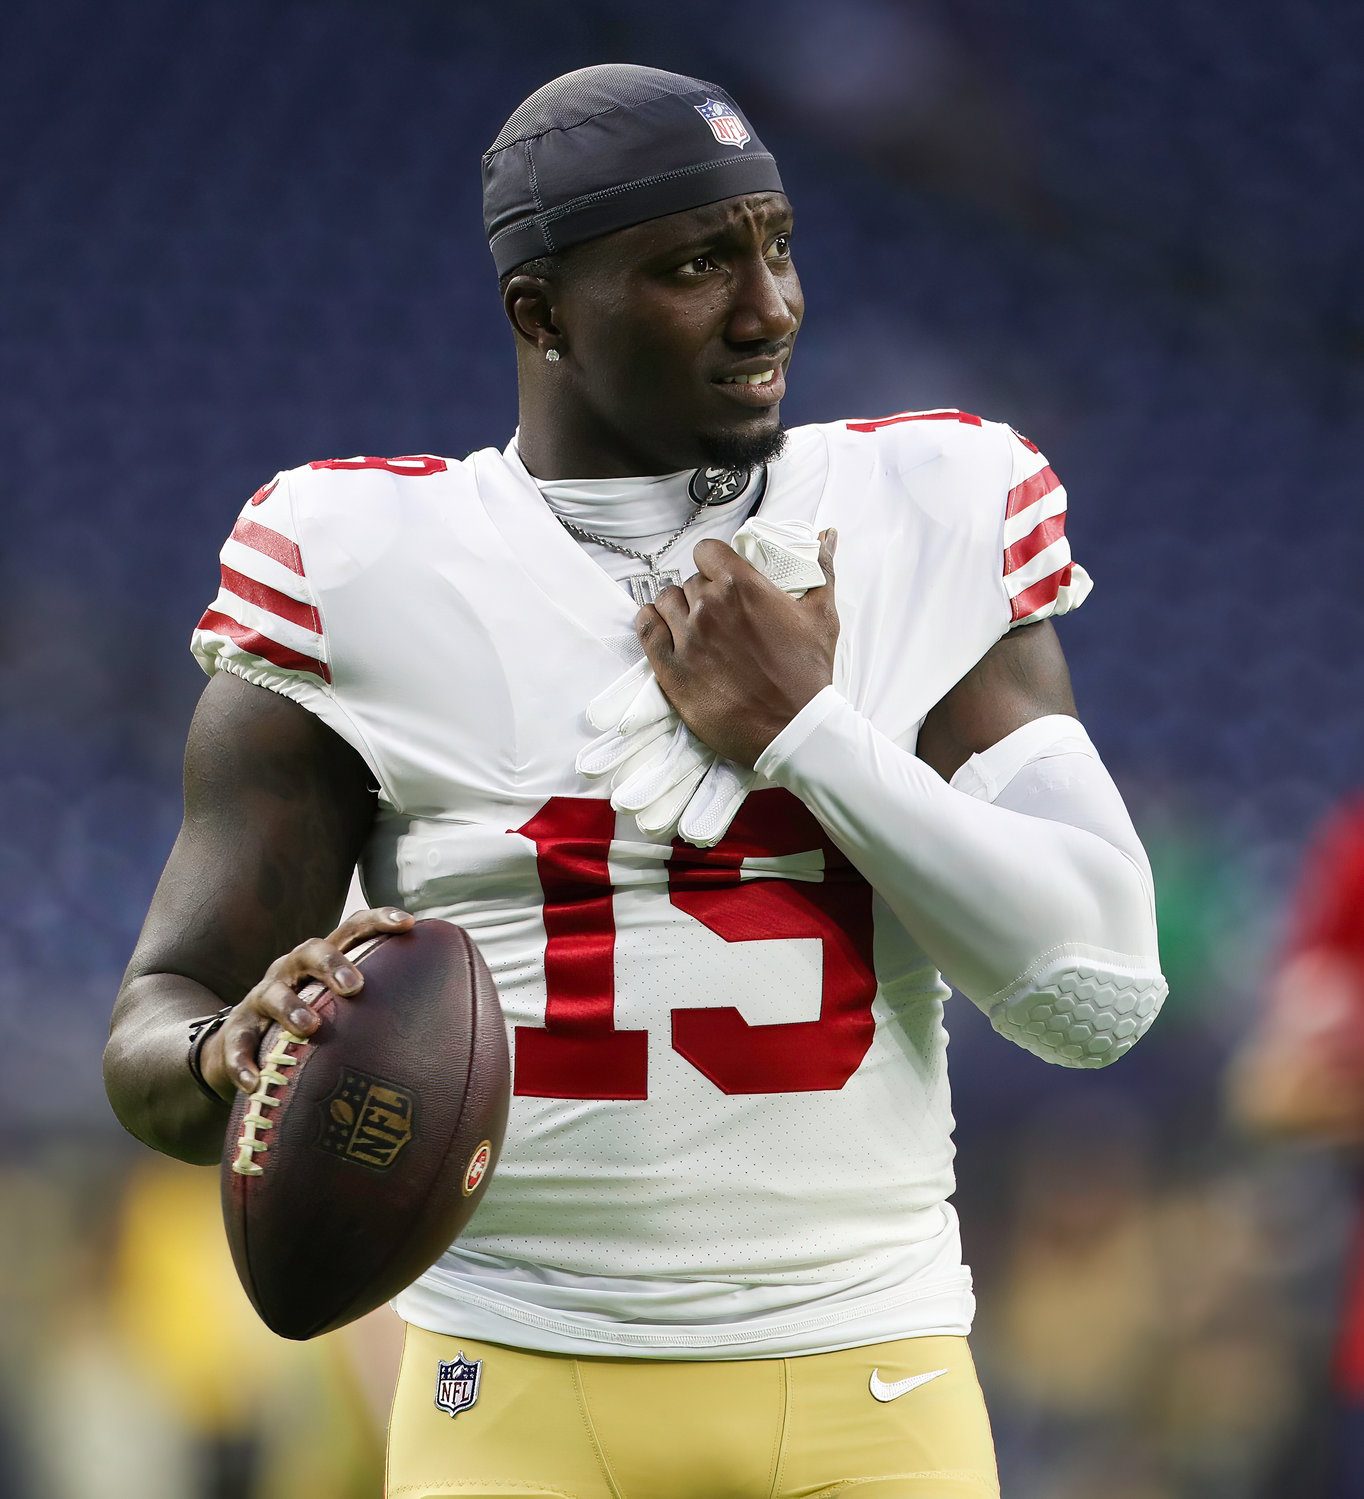 San Francisco 49ers wide receiver Deebo Samuel (19) before the start of an NFL preseason game between the Texans and the 49ers in Houston, Texas, on August 25, 2022.